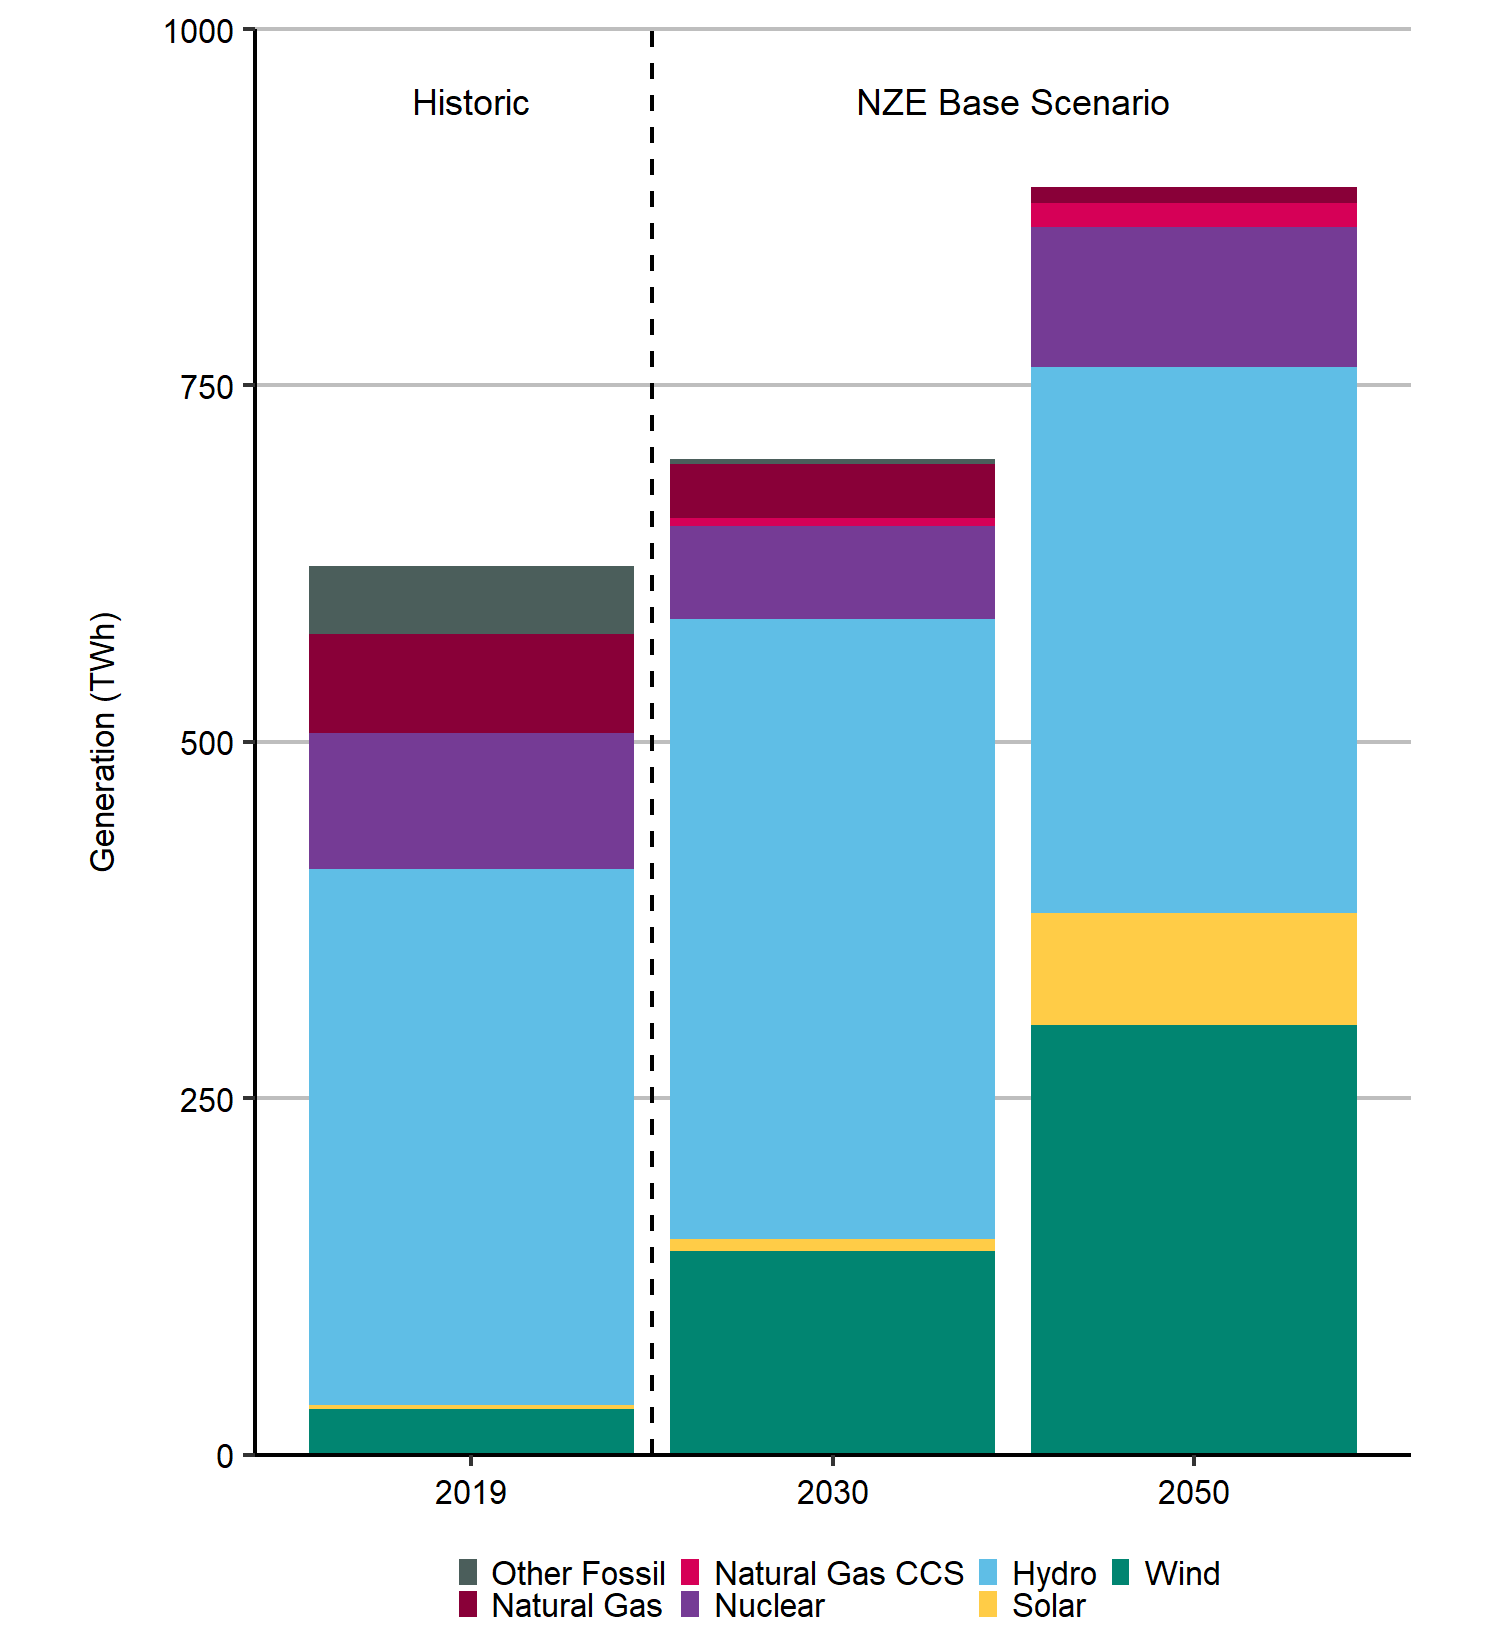 Electricity Generation in Canada by Technology in the NZE Base Scenario